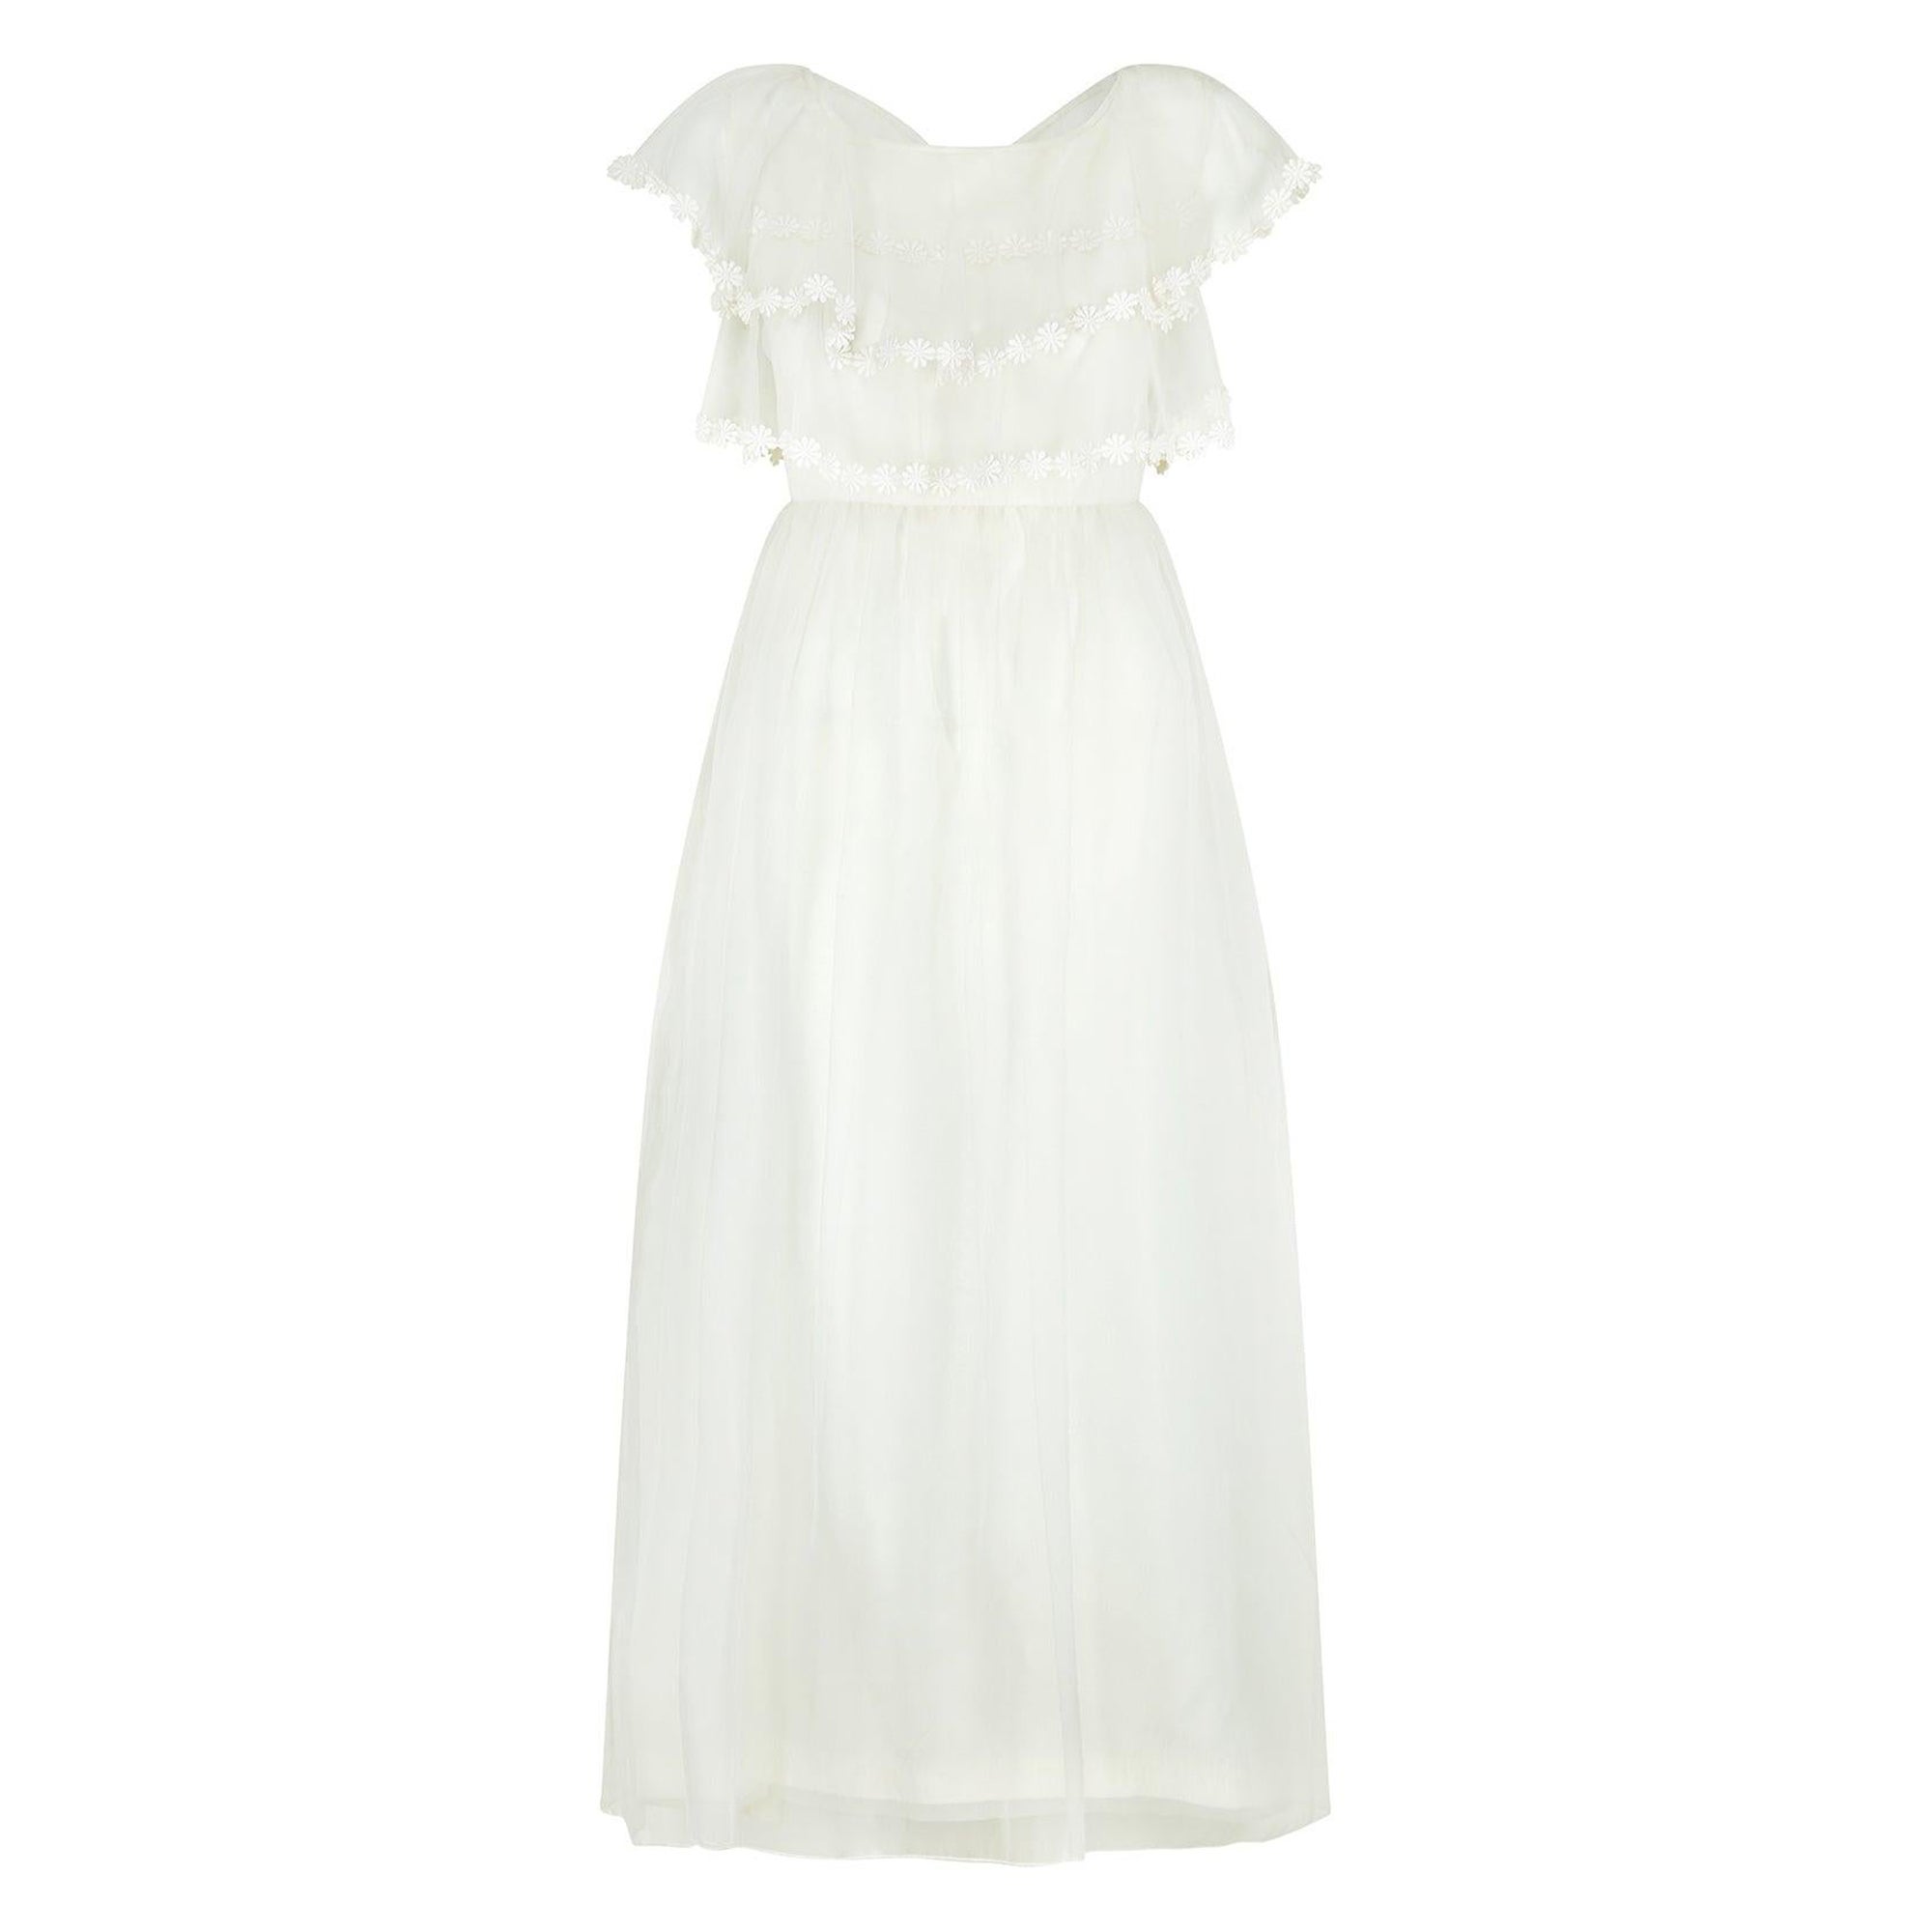 1960s Georgette Wedding Dress with Daisy Lace Trim For Sale